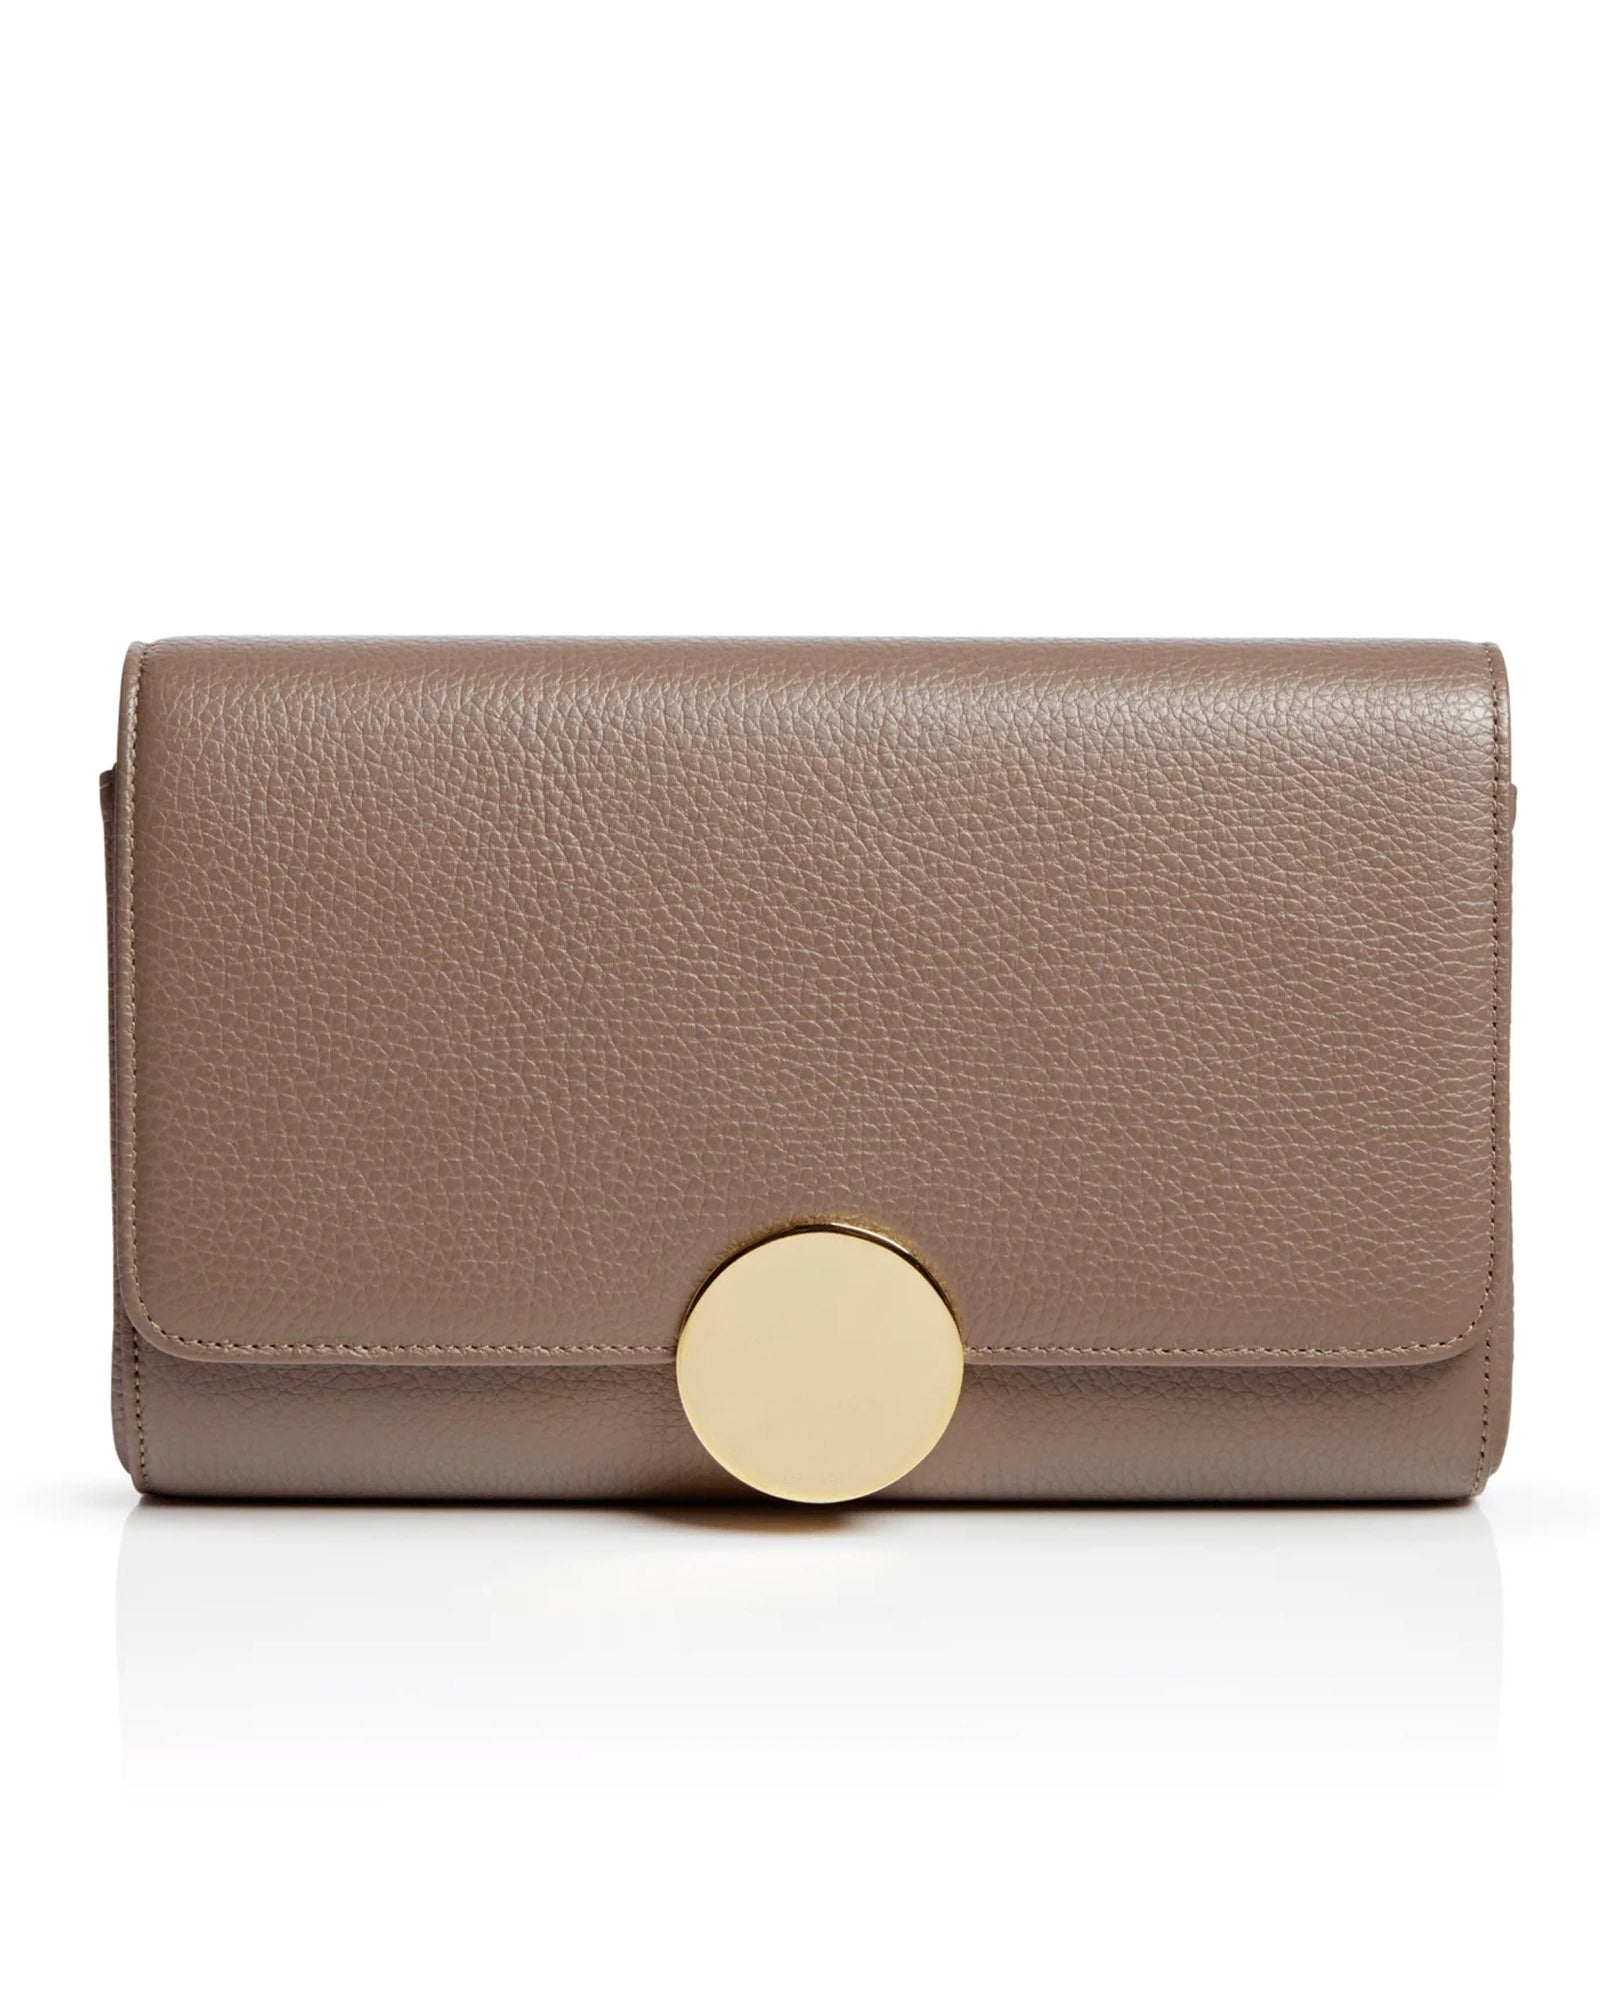 Naomi Textured Taupe Leather Occasion Bag Leather Clutch Bag  image